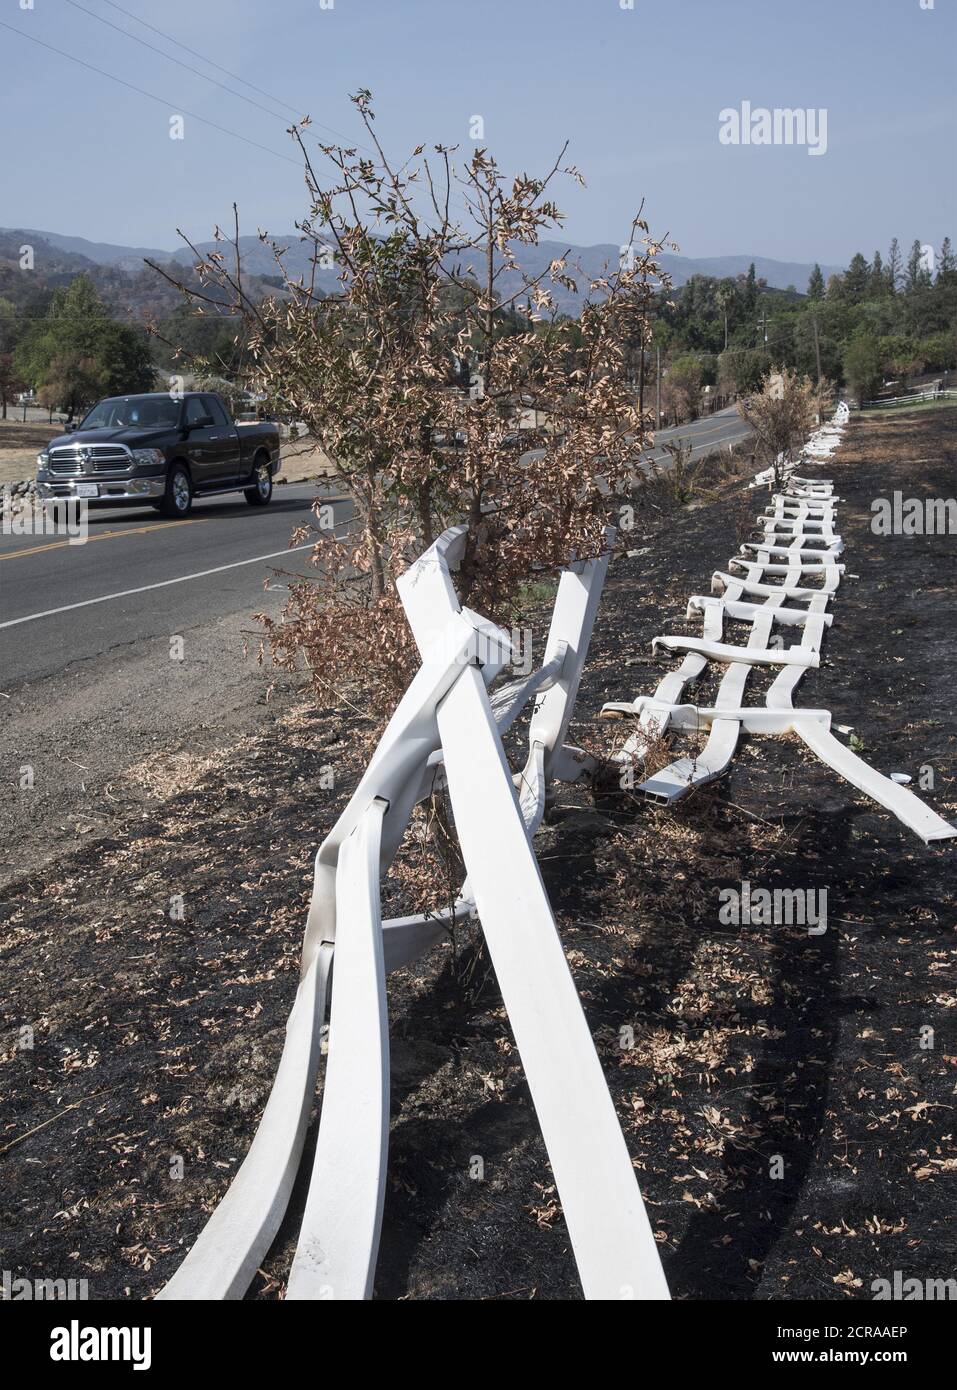 Vacaville, United States. 19th Sep, 2020. Melted vinyl ranch fence lies along Pleasants Valley Road in Vacaville, California on Saturday, September 19, 2020. Over 19,000 firefighters continue to battle 27 major wildfires in California as over 3.5 million acres have burned with no end in sight. Photo by Terry Schmitt/'UPI Credit: UPI/Alamy Live News Stock Photo